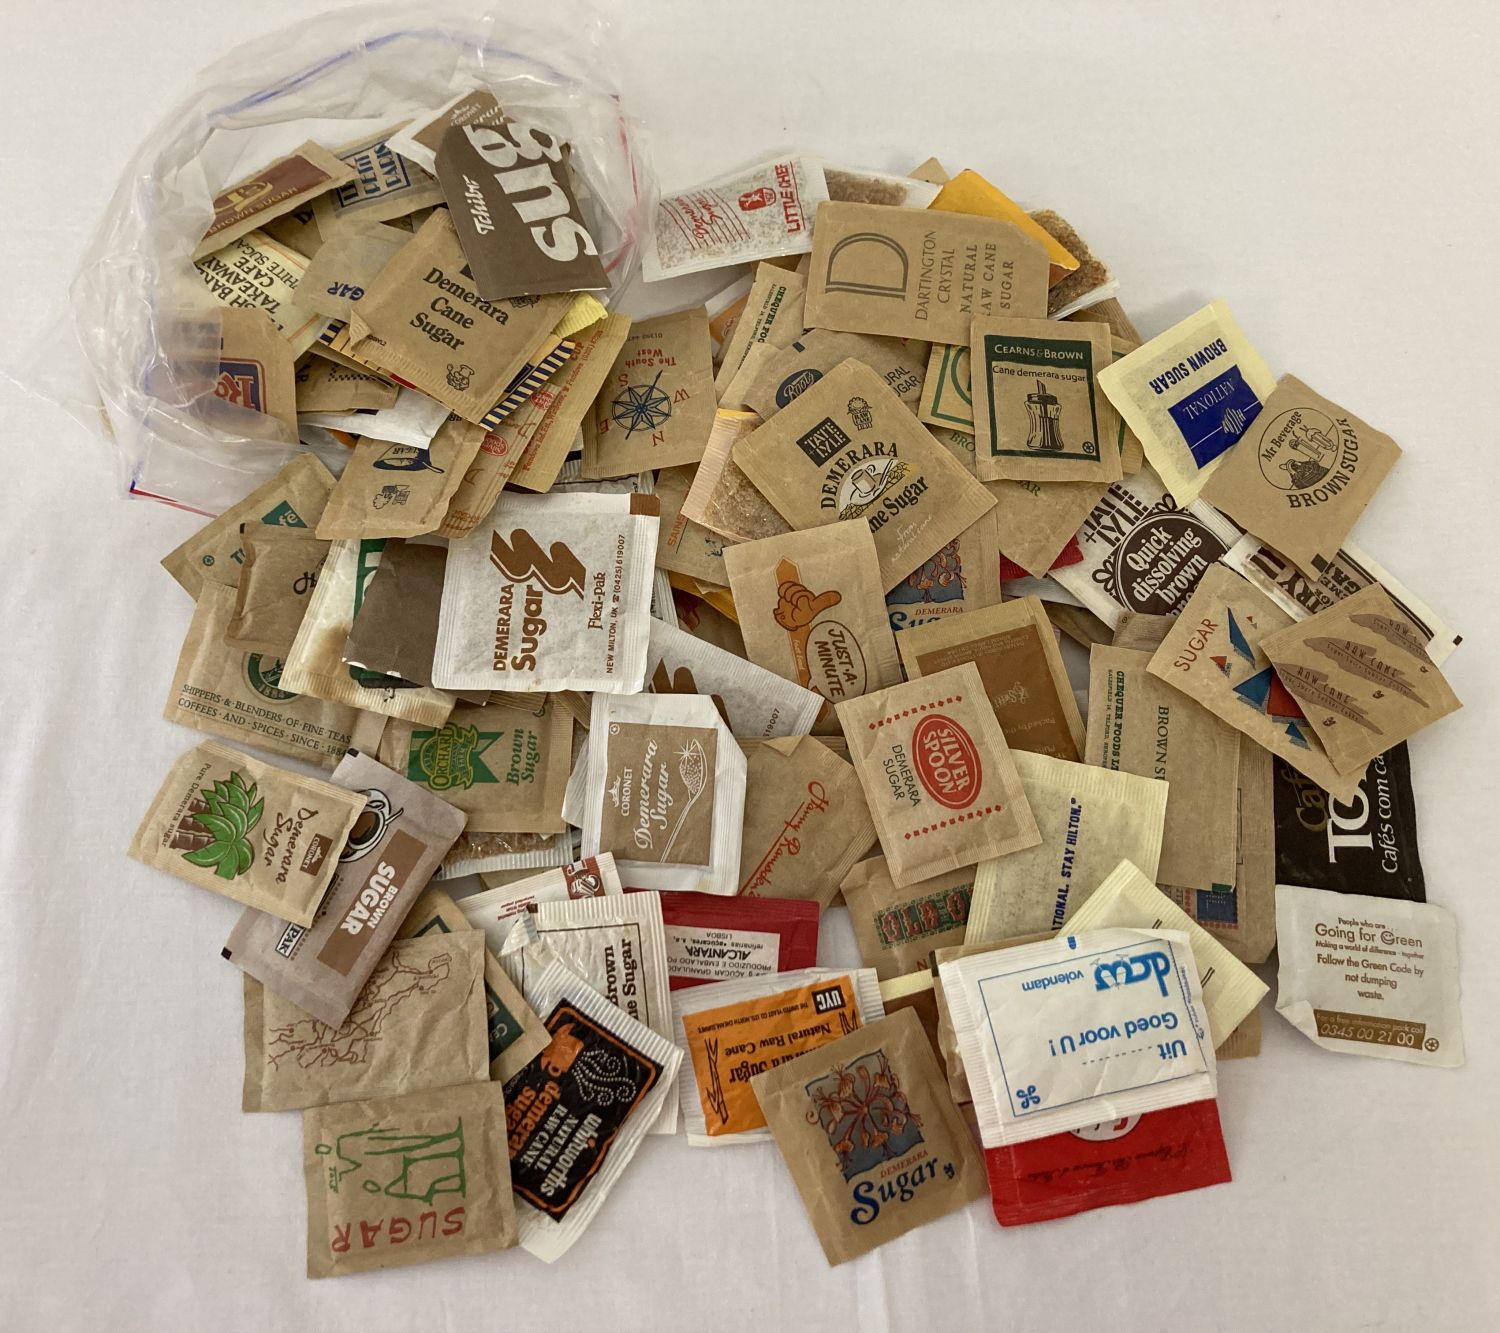 Sucrology collection - 4 boxes of vintage collectable sugar packets and sachets. - Image 5 of 8